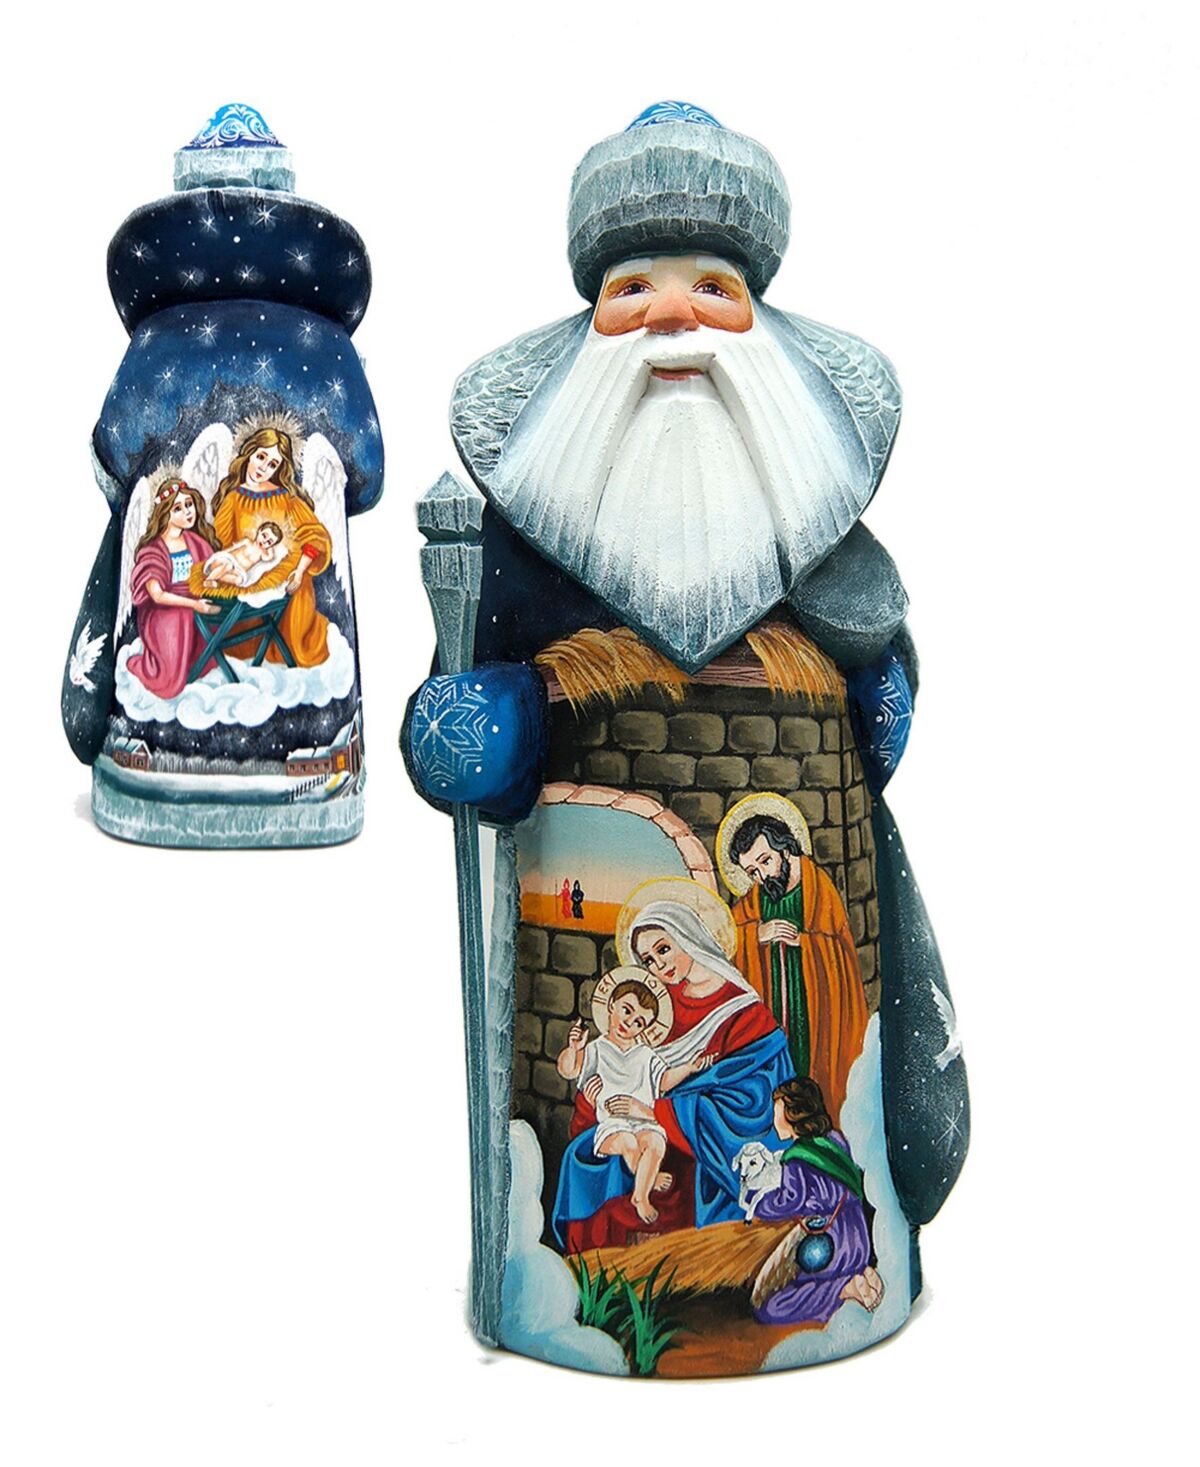 G.DeBrekht Woodcarved and Hand Painted Story of Nativity Santa and Hand Painted - Multi